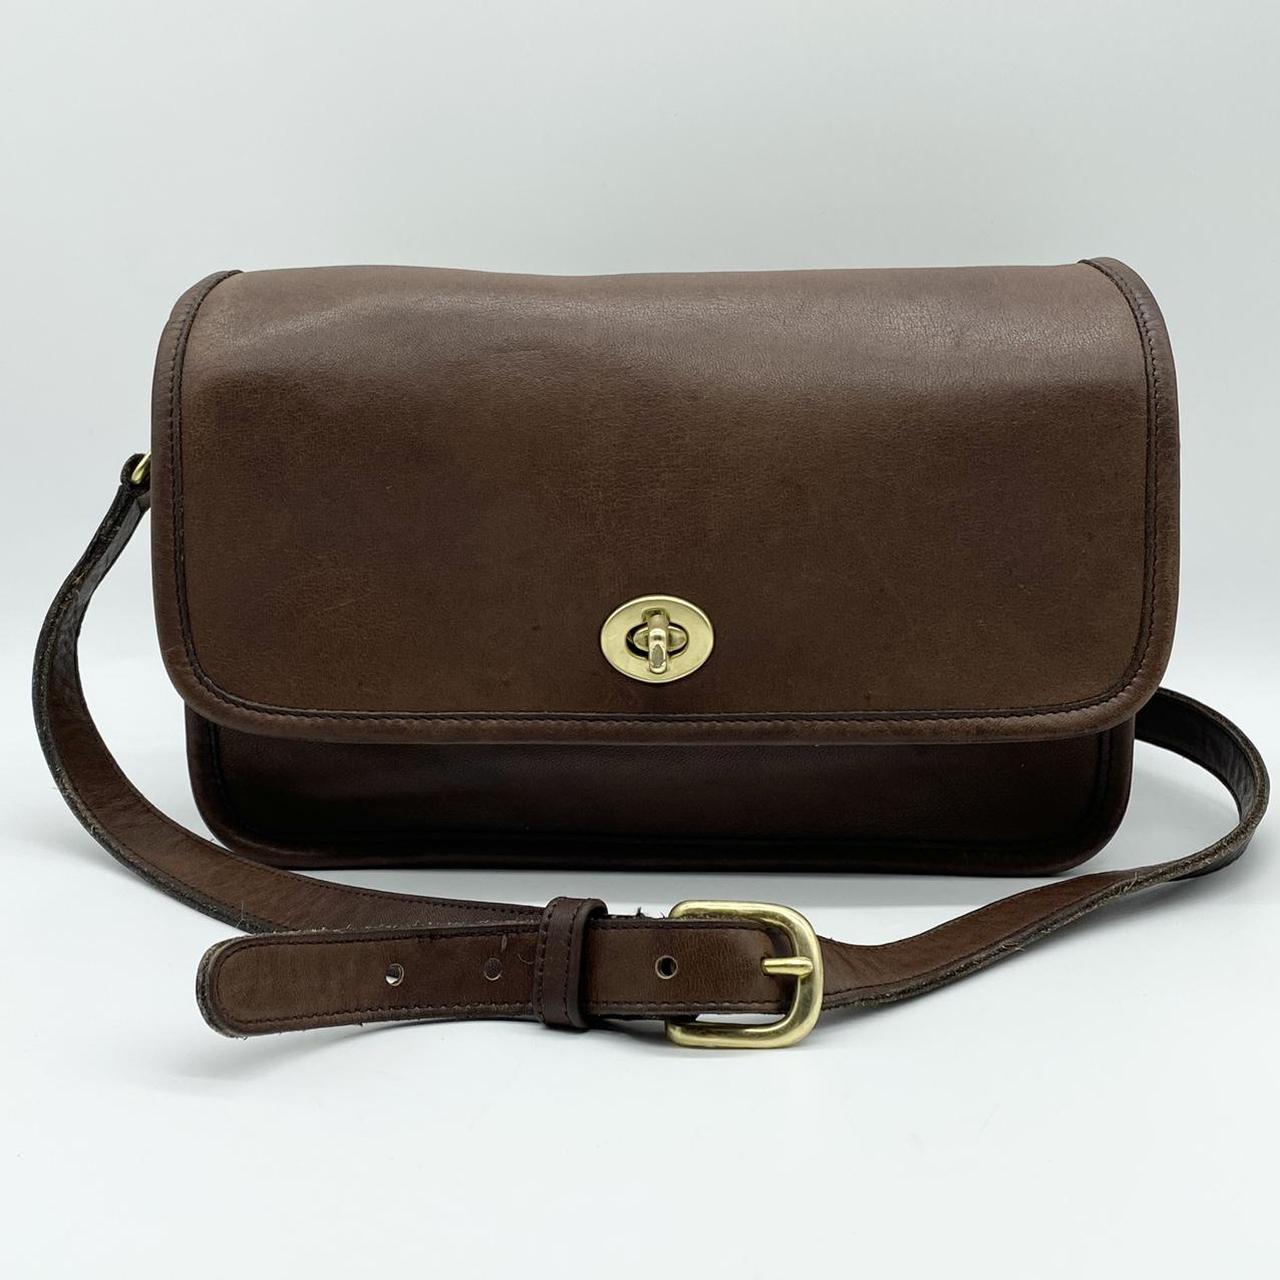 Product Image 1 - Beautiful vintage Coach compartment bag